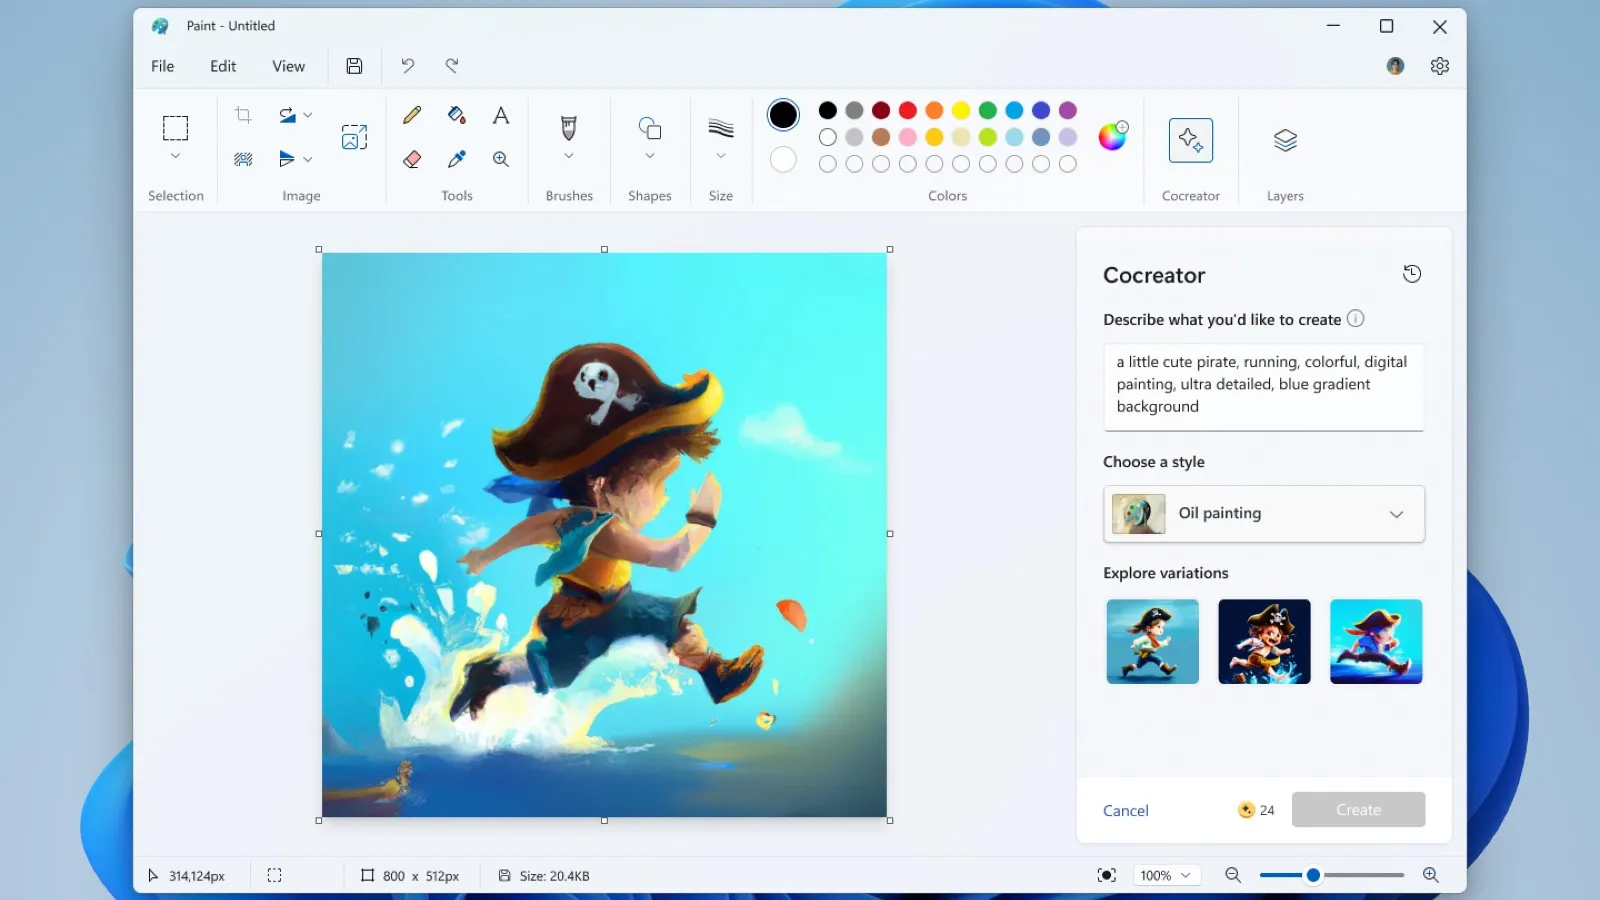 Microsoft Paint is getting an AI-powered image generator that responds to your text prompts and doodles